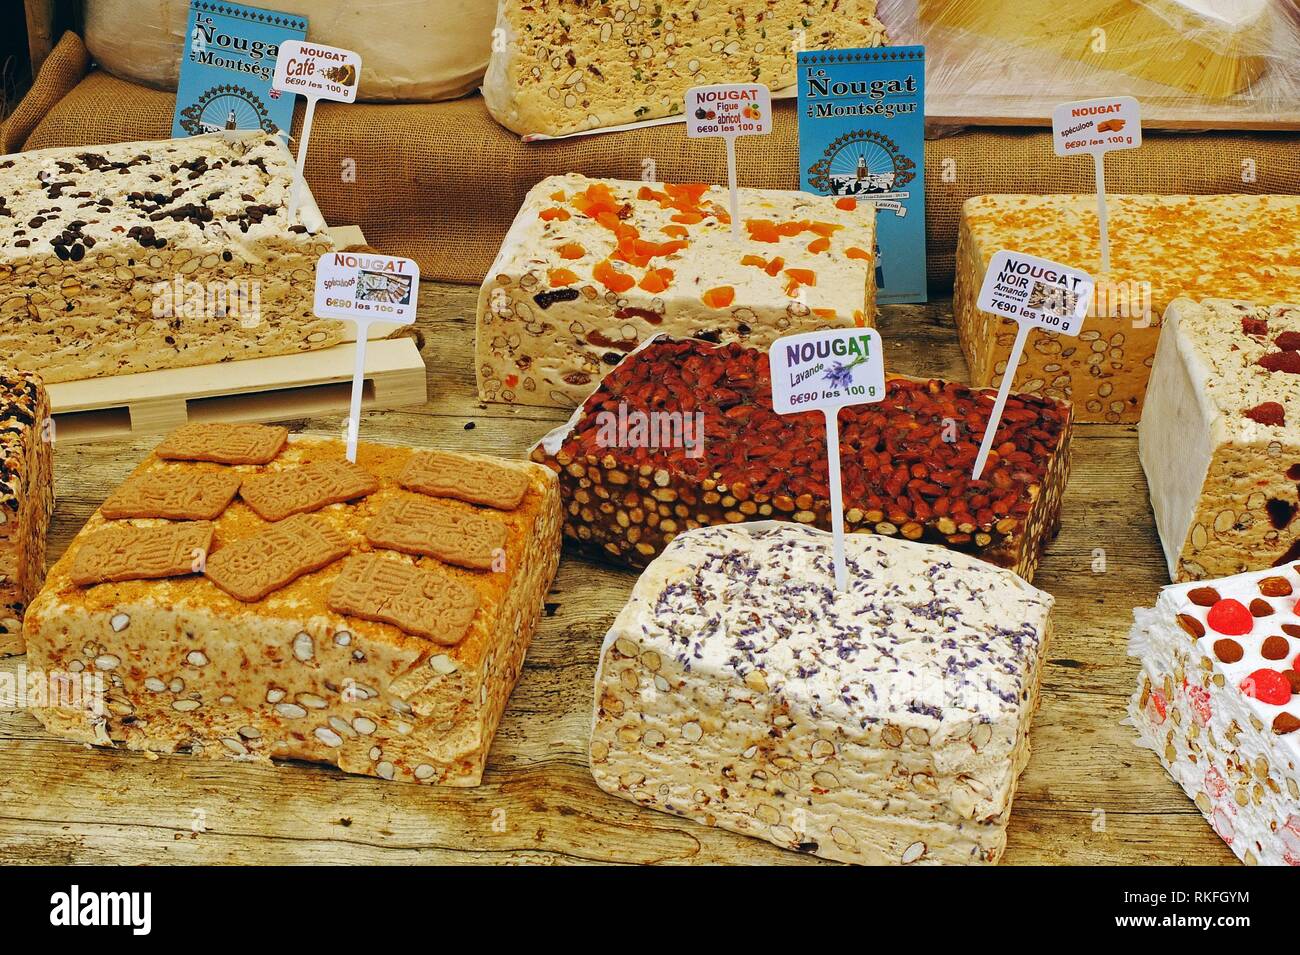 A market booth features artisanal homemade nougats in many flavors, Pezenas, France Stock Photo